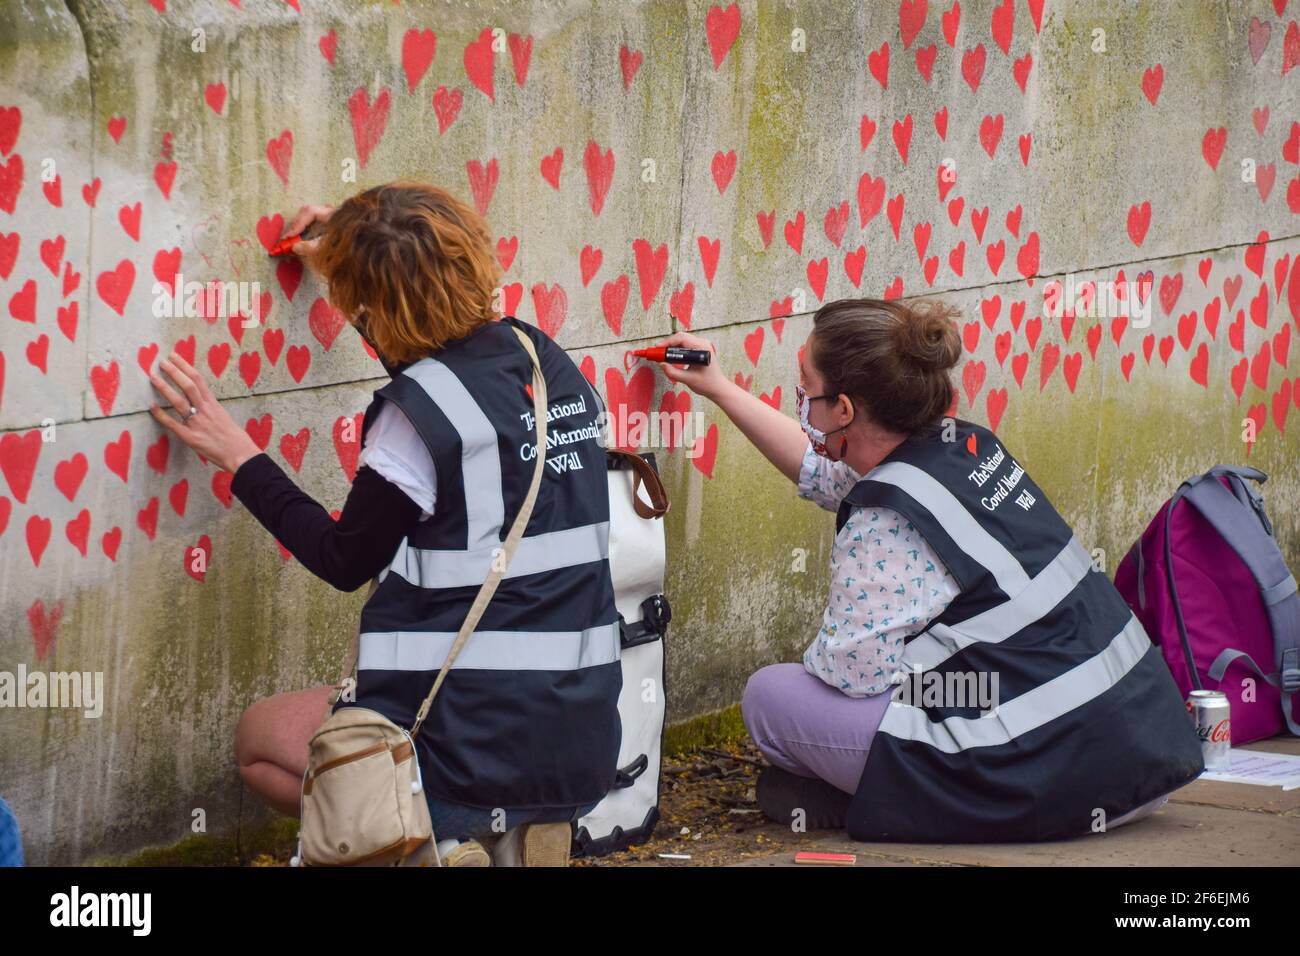 London, United Kingdom. 31st March 2021. Volunteers paint red hearts on the National Covid Memorial Wall. Nearly 150,000 hearts will be painted by volunteers, one for each Covid-19 victim in the UK to date, on the wall outside St Thomas' Hospital opposite Houses Of Parliament. Stock Photo